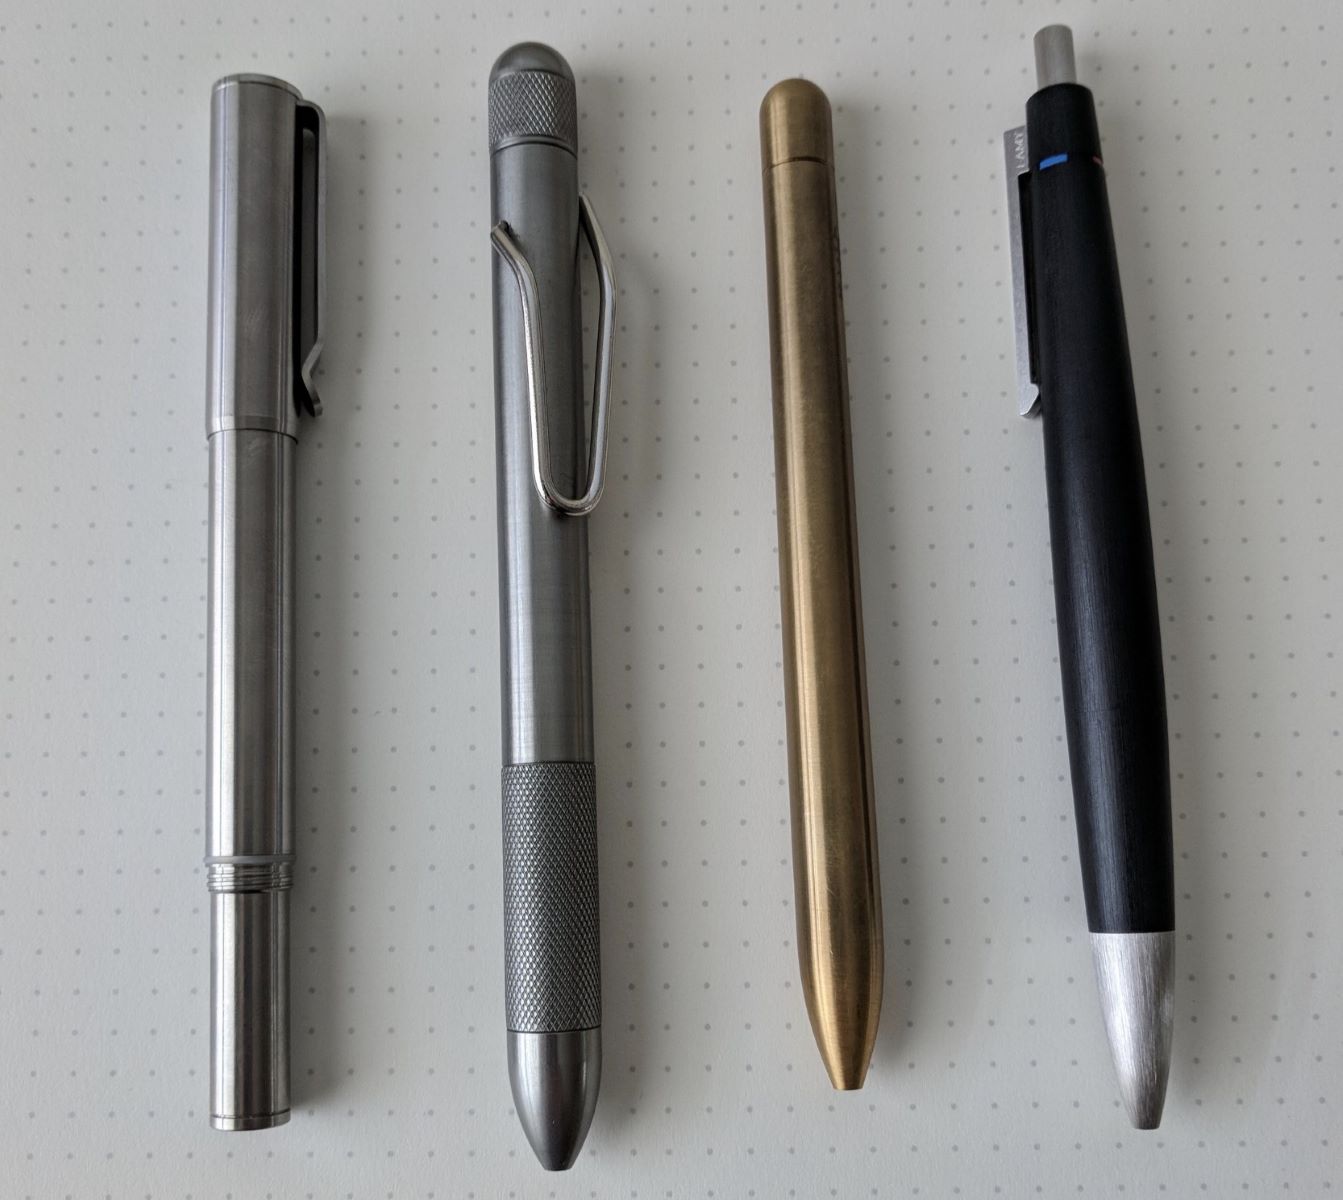 Stylus Selection: Identifying The Best Pen For Your Needs